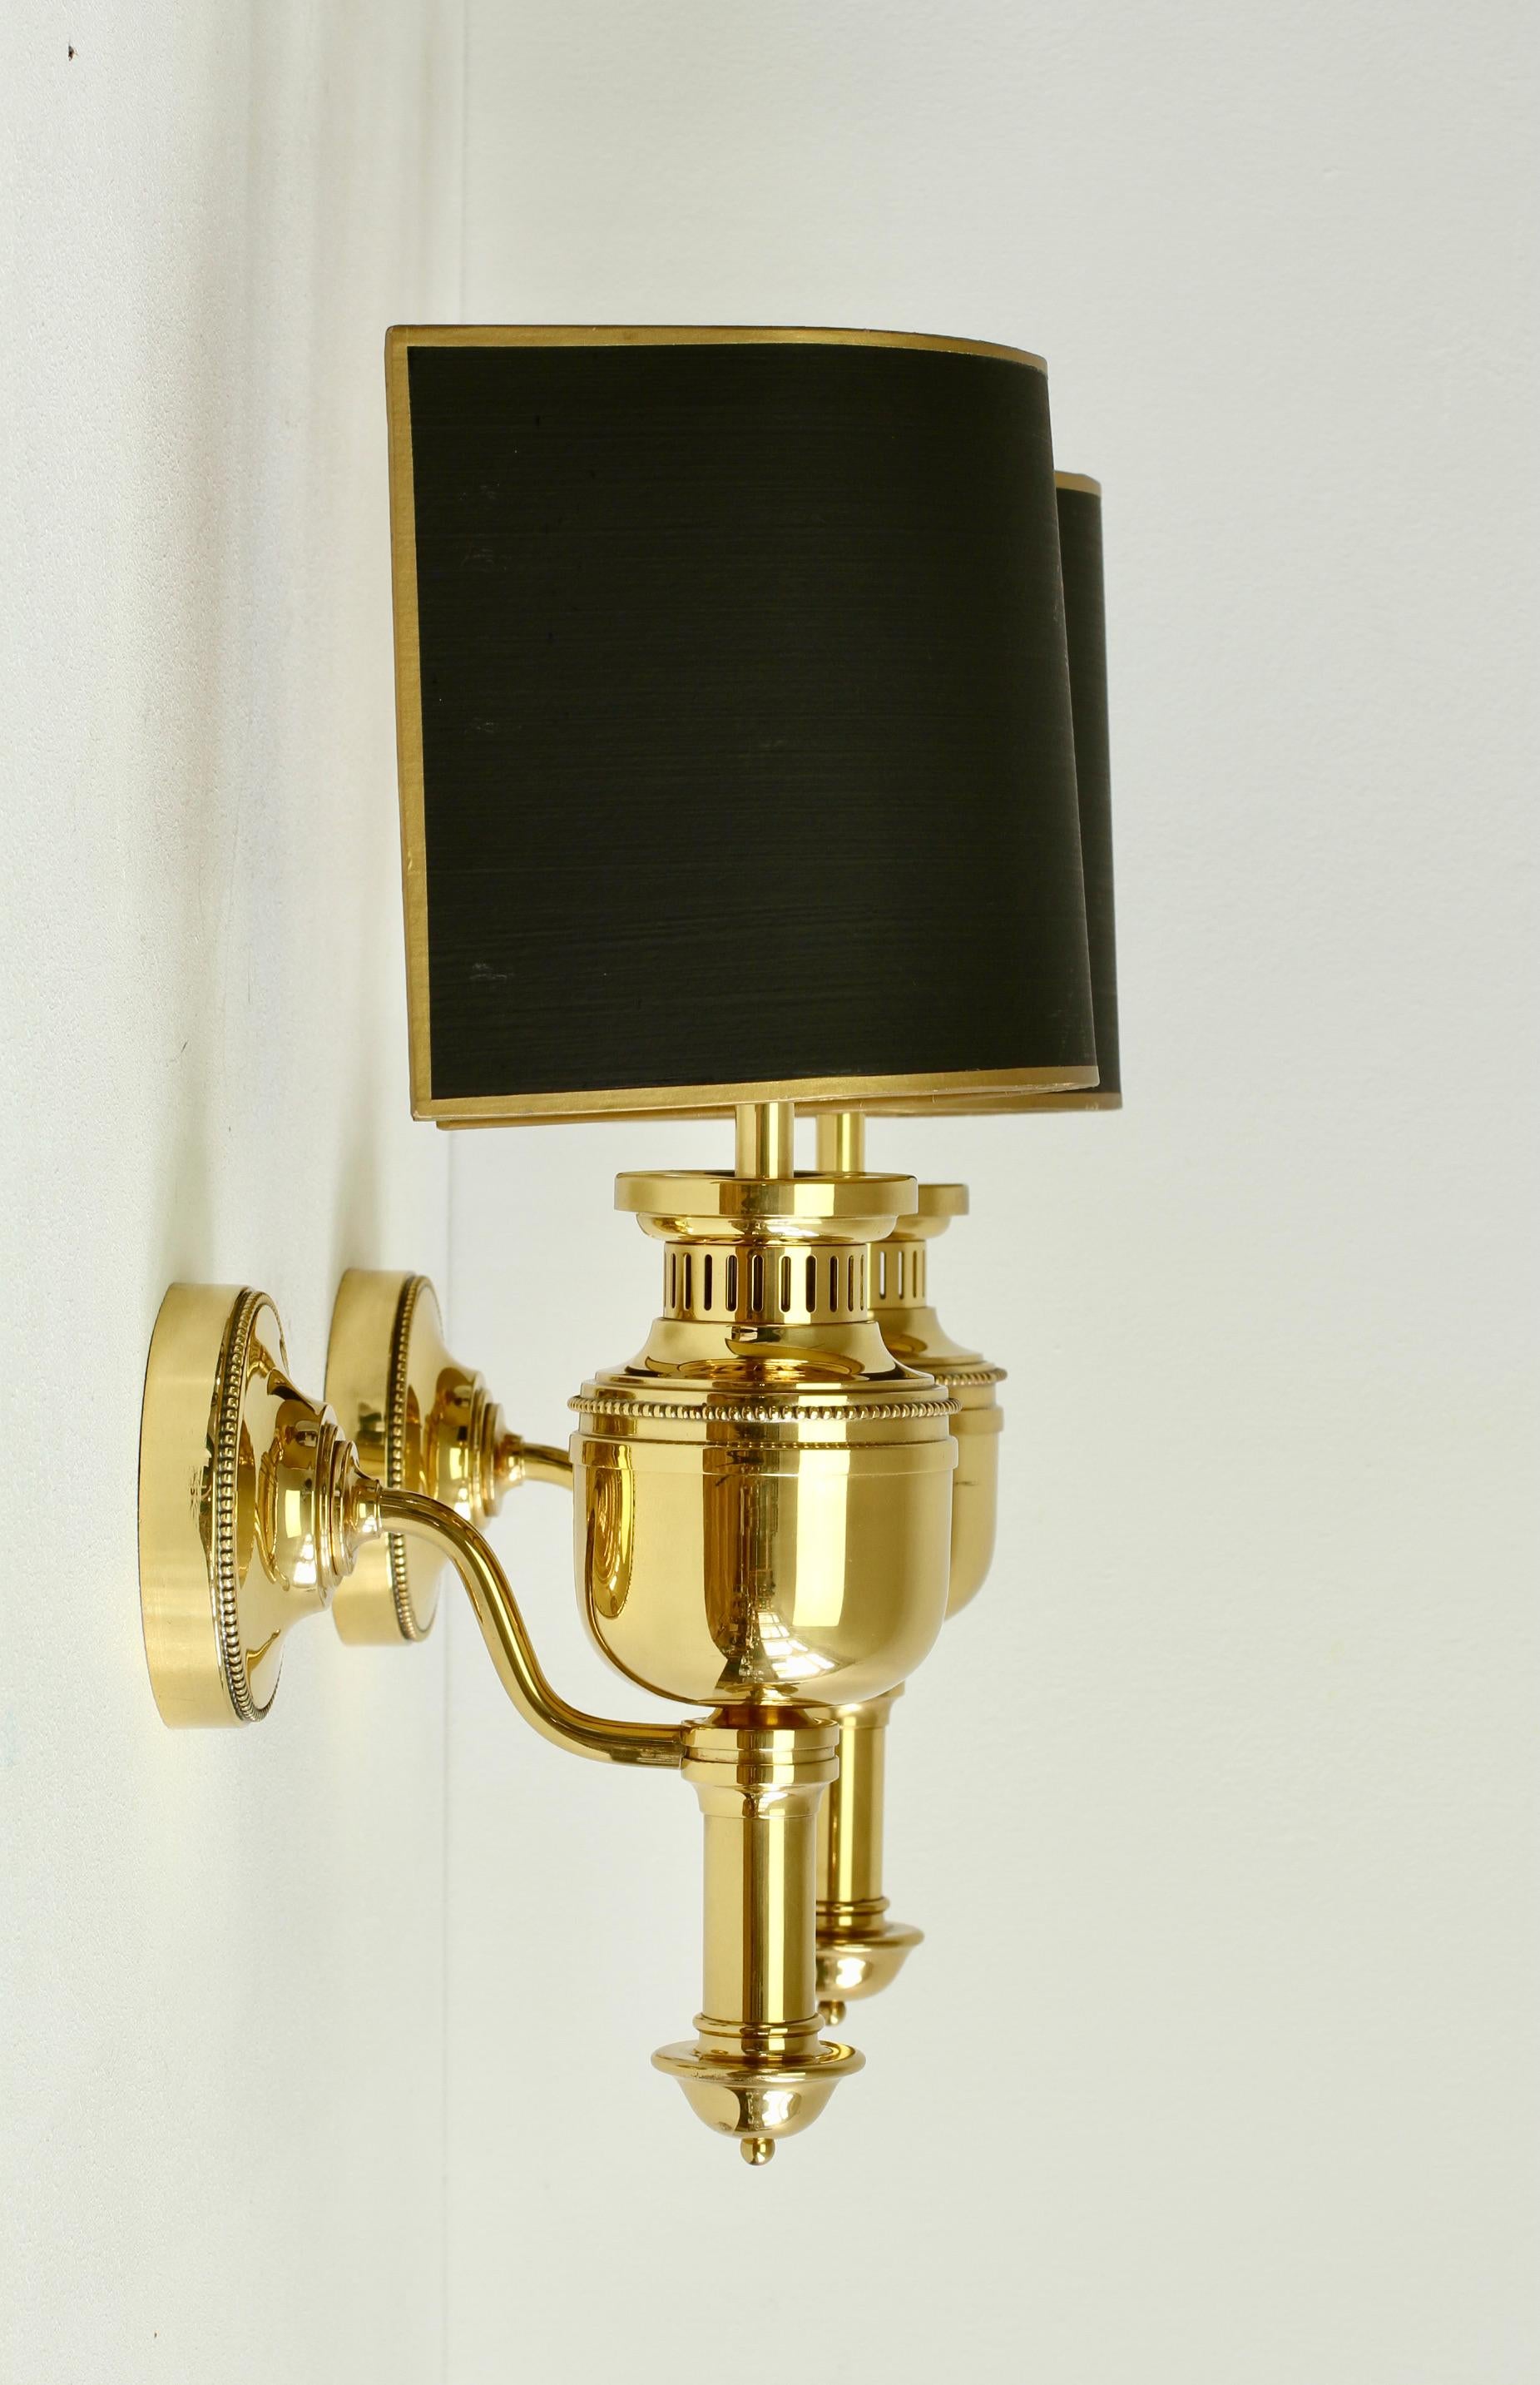 Stunning large pair of 'vintage midcentury wall lights, lamps or sconces in polished solid brass with original black hand-painted gold trim curved / half-round shades by the Vereinigten Werkstätten München (Munich), circa 1970s. Beautiful design and